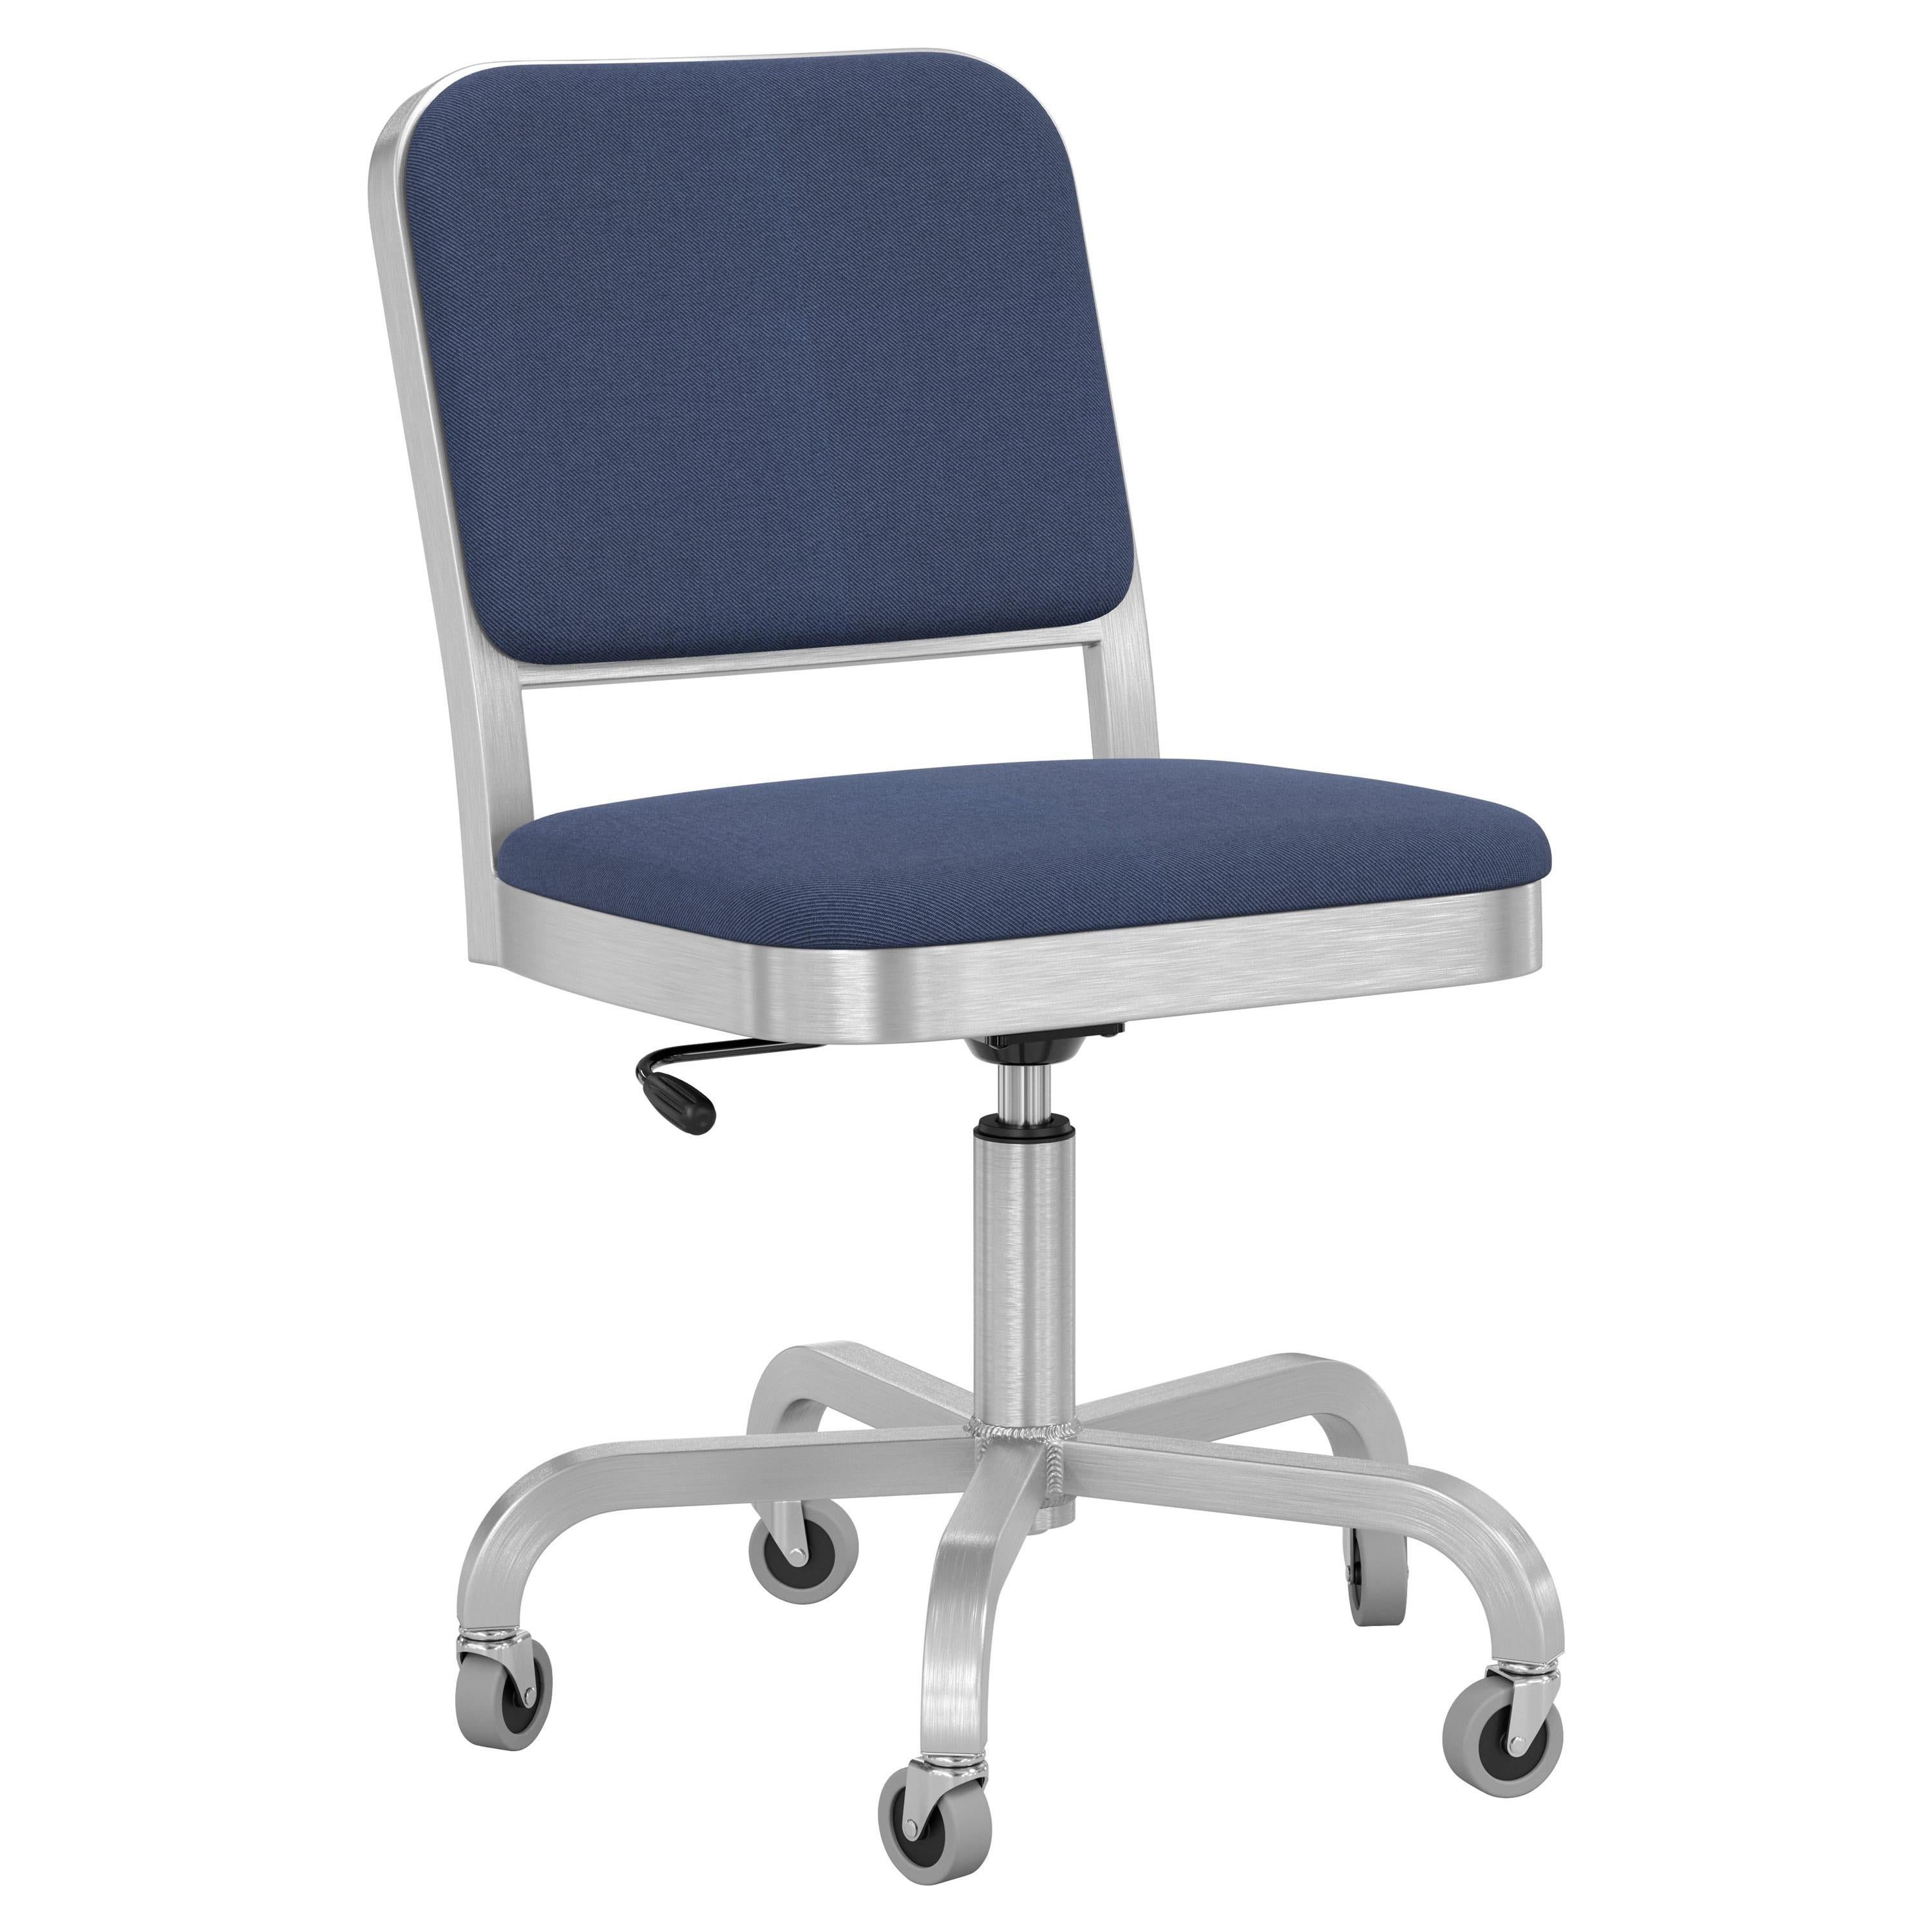 Emeco Navy Officer Swivel Chair in Navy Blue Fabric with Aluminum Frame For Sale